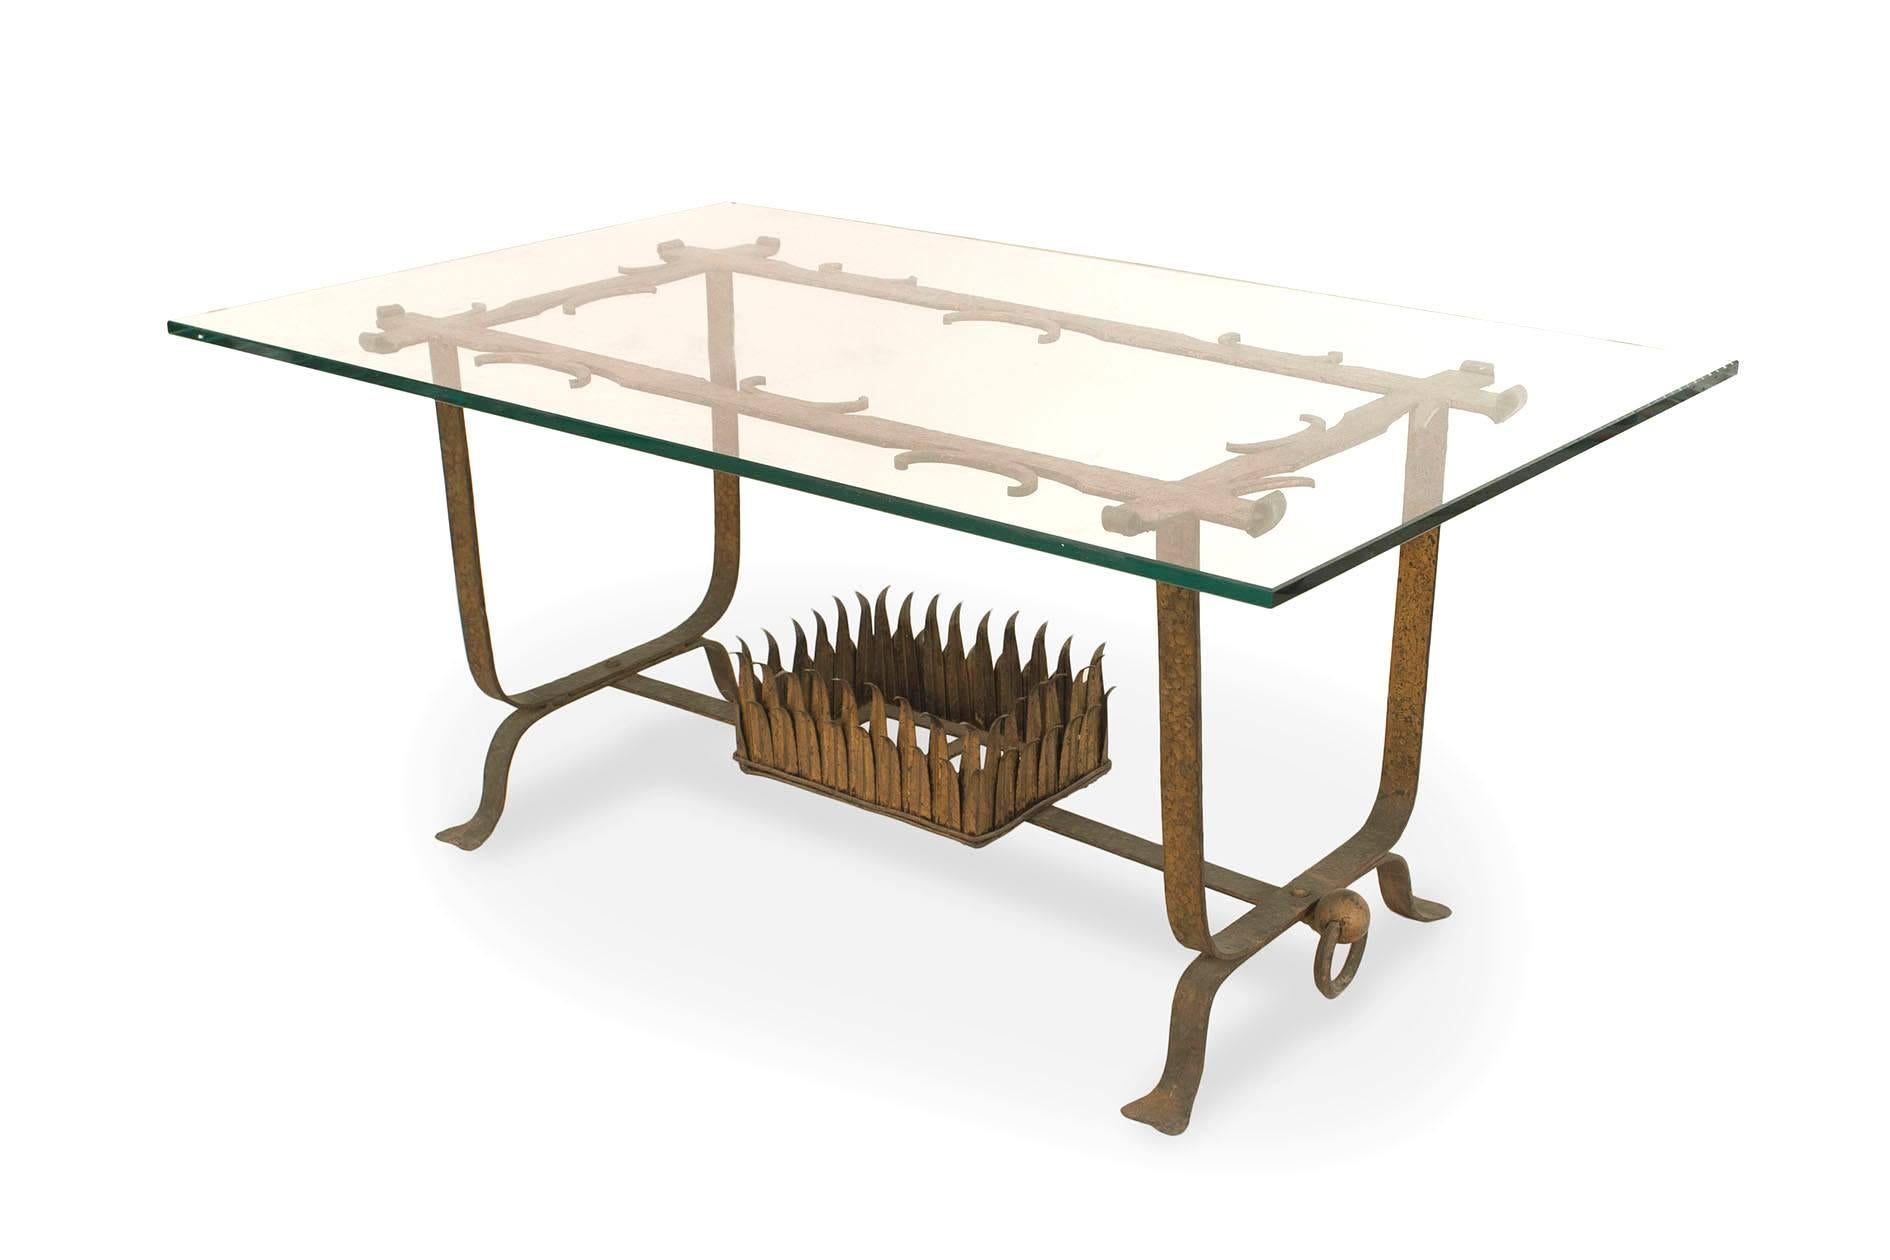 Italian Renaissance-style (1930s) gilt wrought iron coffee table with a rectangular beveled glass top supported on a base with ring sides, a stretcher, and a centered small shelf with a leaf border.
